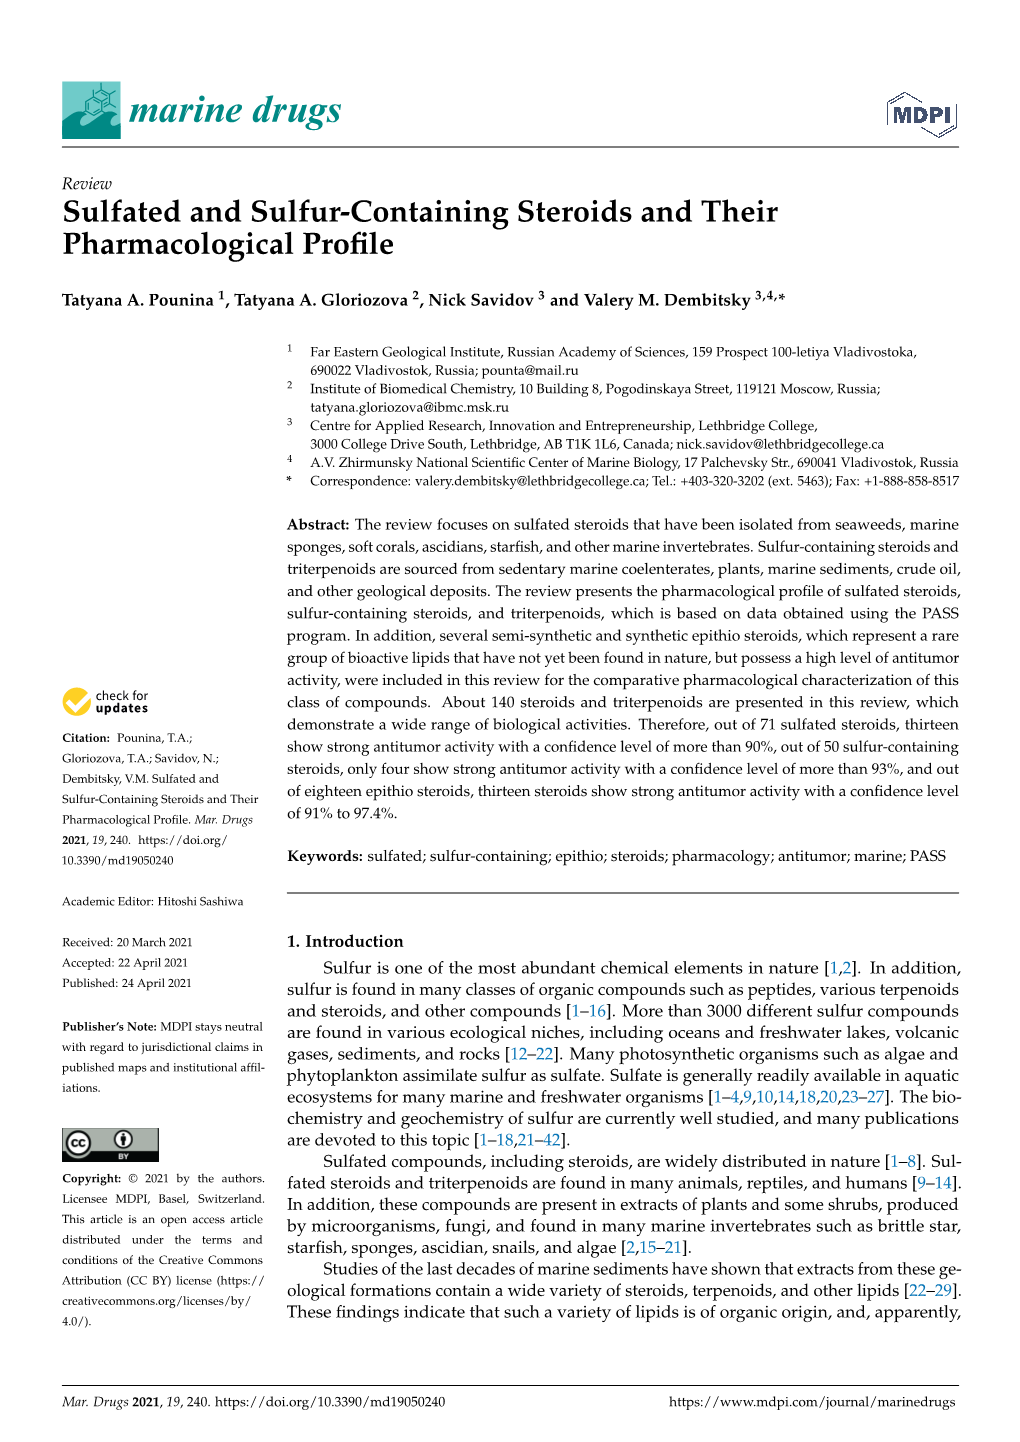 Sulfated and Sulfur-Containing Steroids and Their Pharmacological Proﬁle